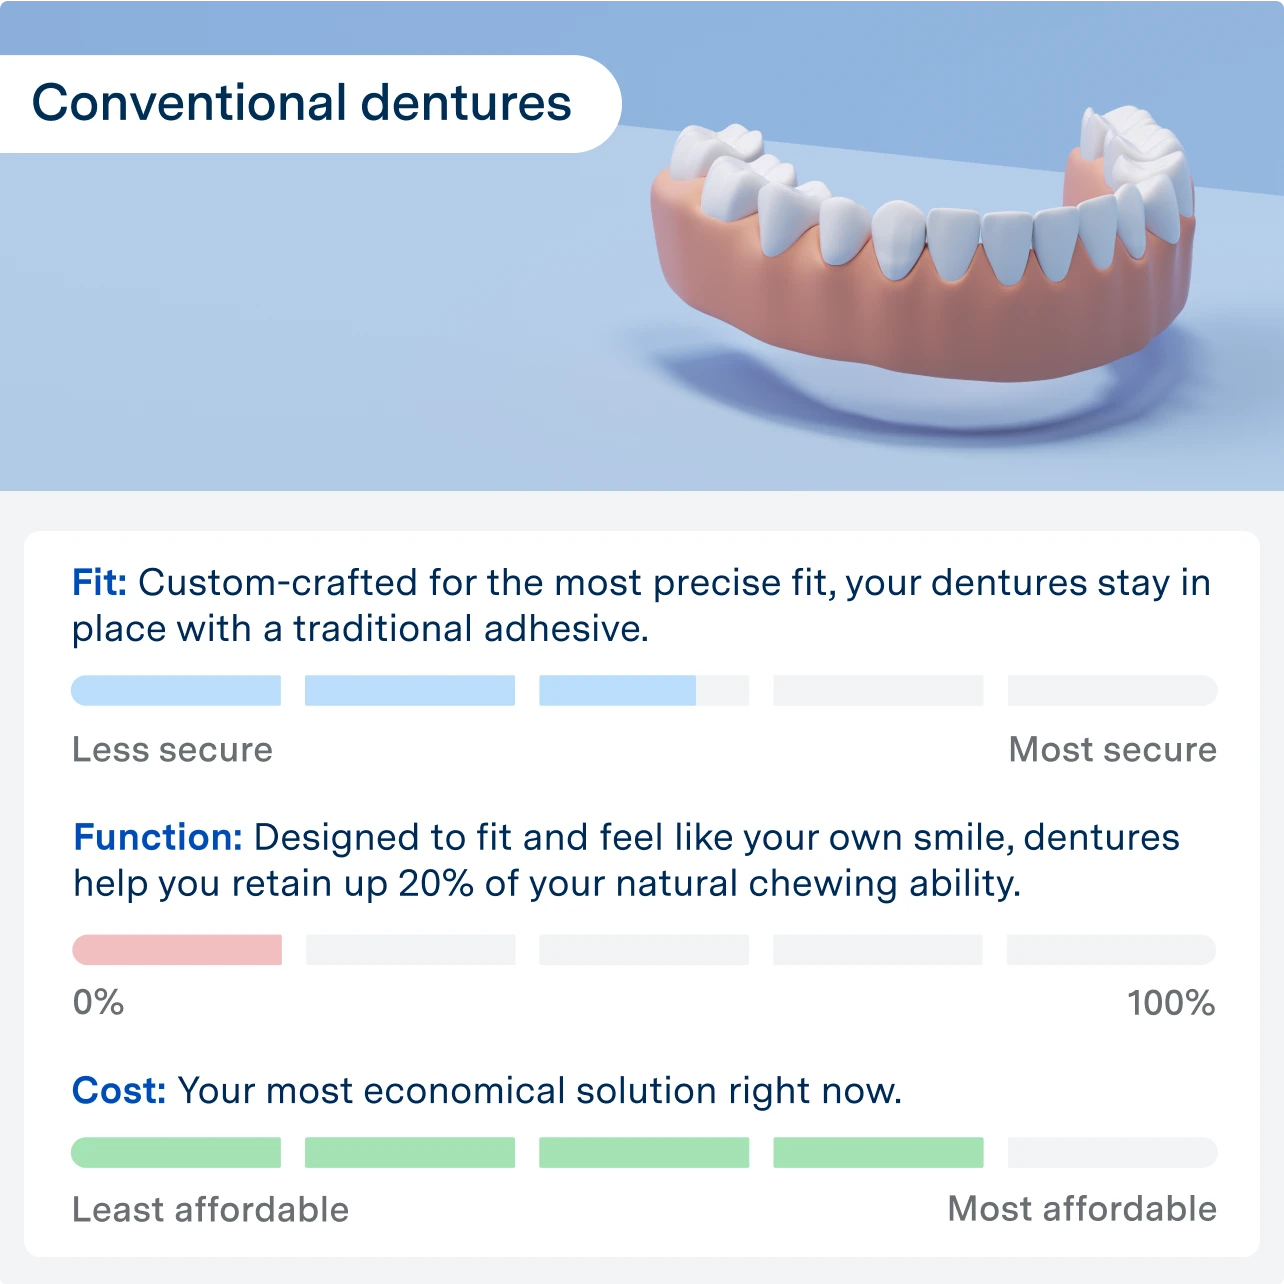 Aspen Dental infographic explaining the fit, function and cost of conventional dentures. 